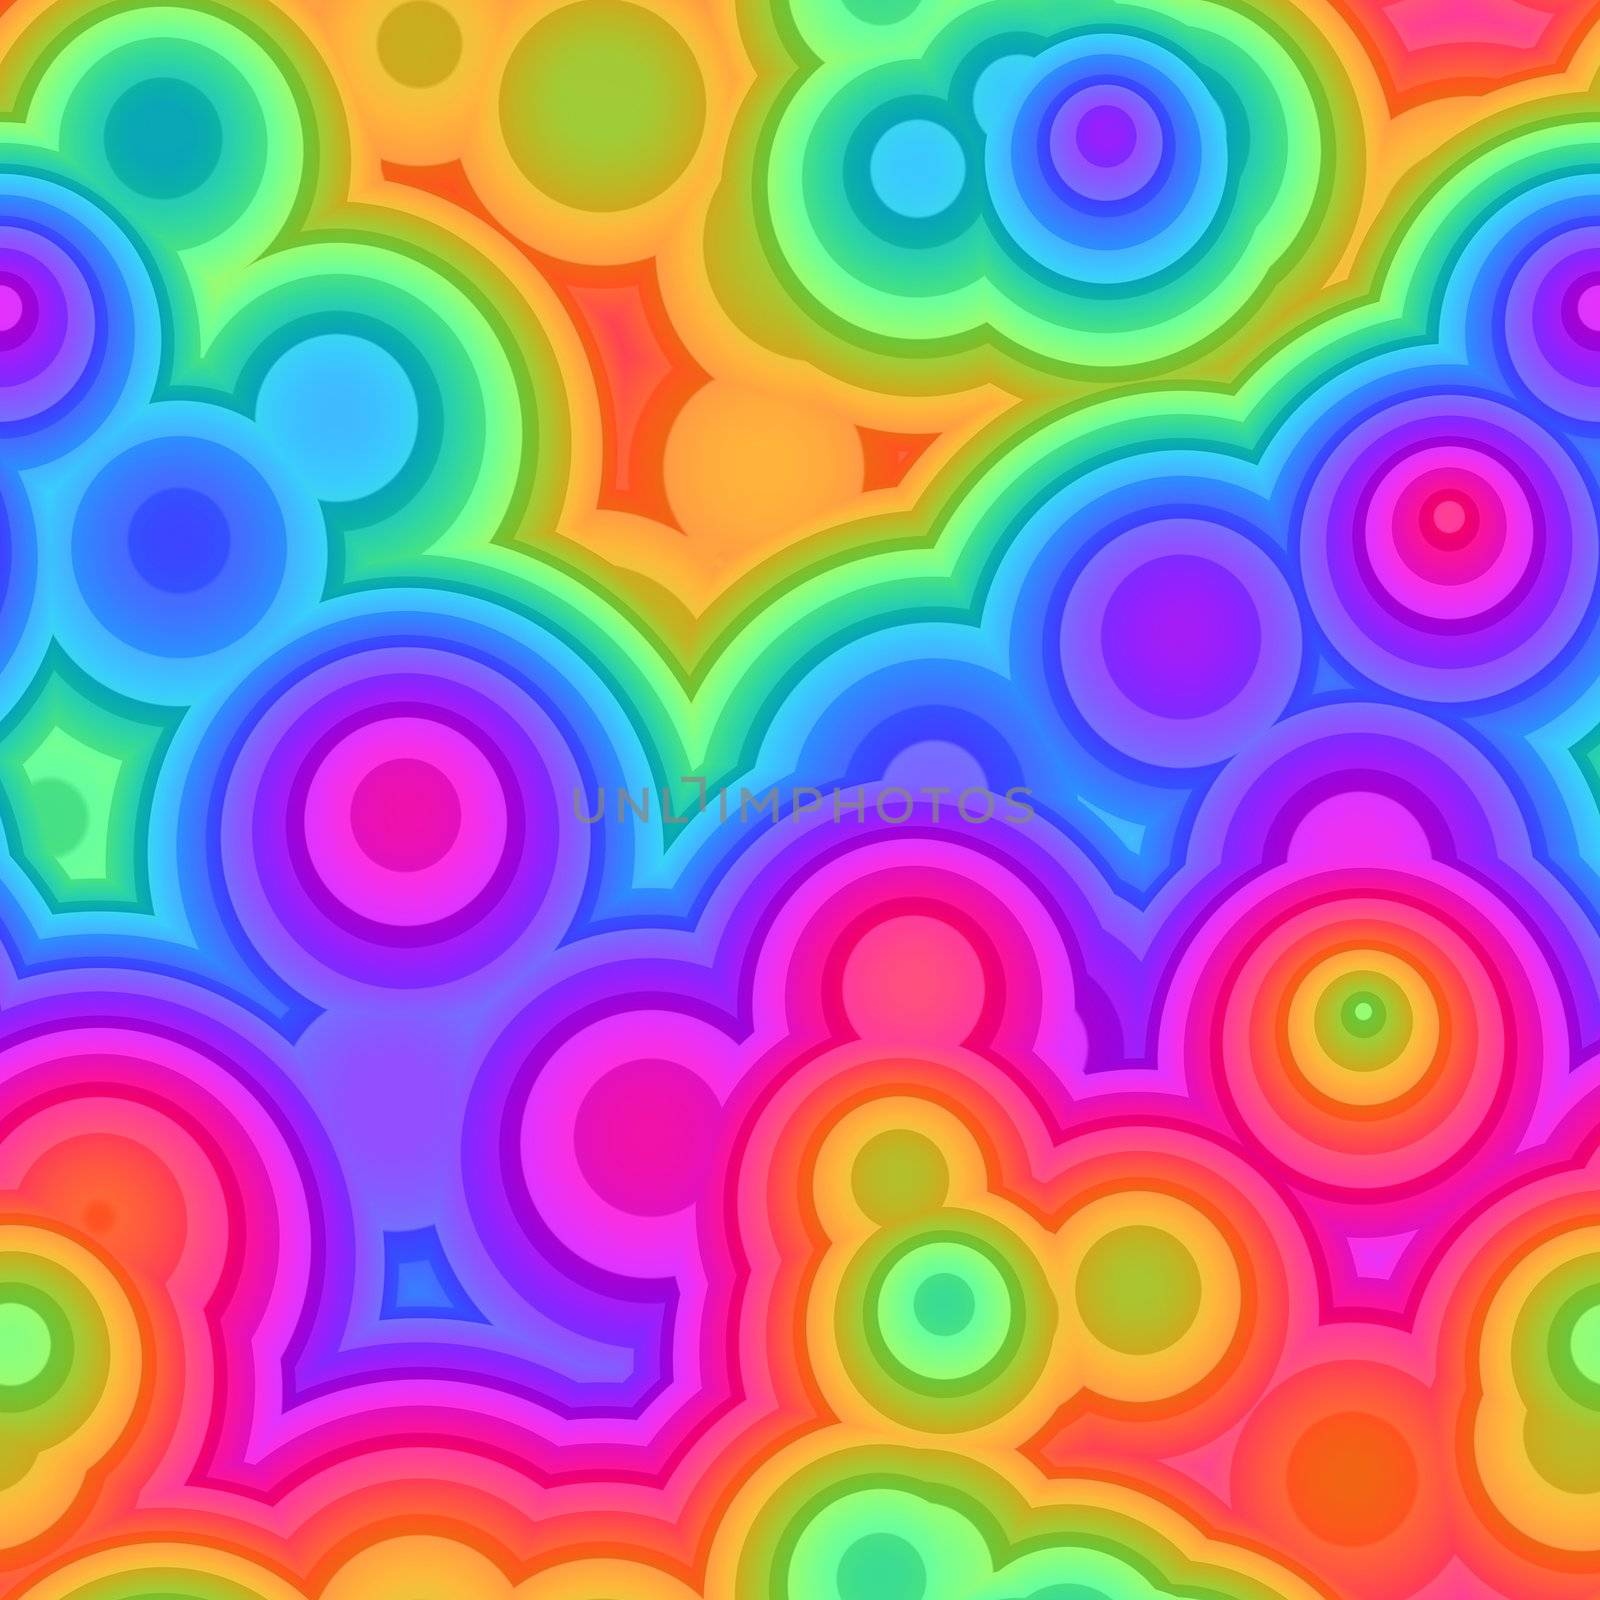 abstract texture of large colorful round shapes